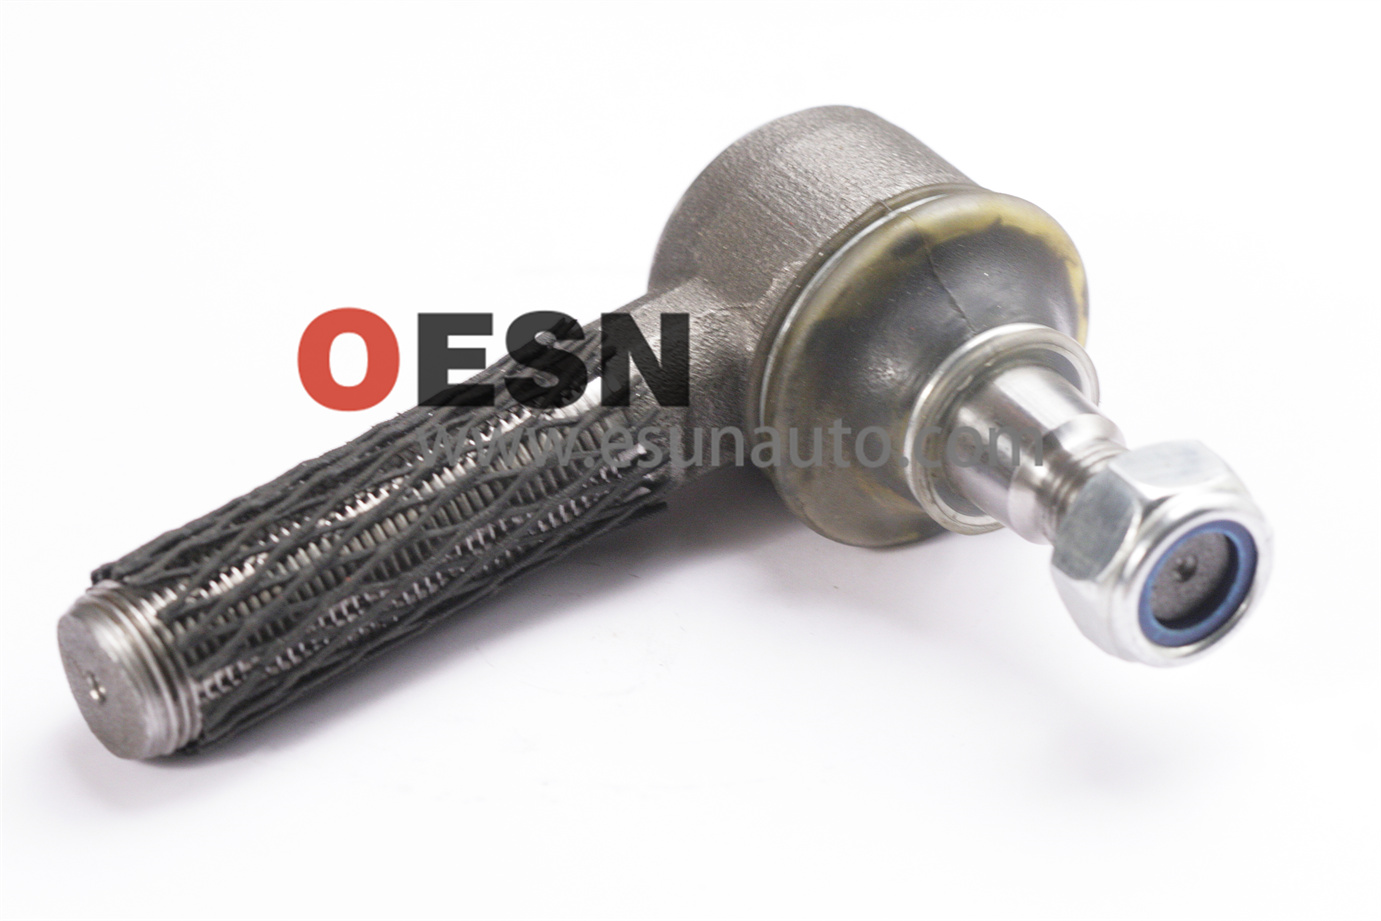 Tie-rod end right ESN80025  OEM8972225090